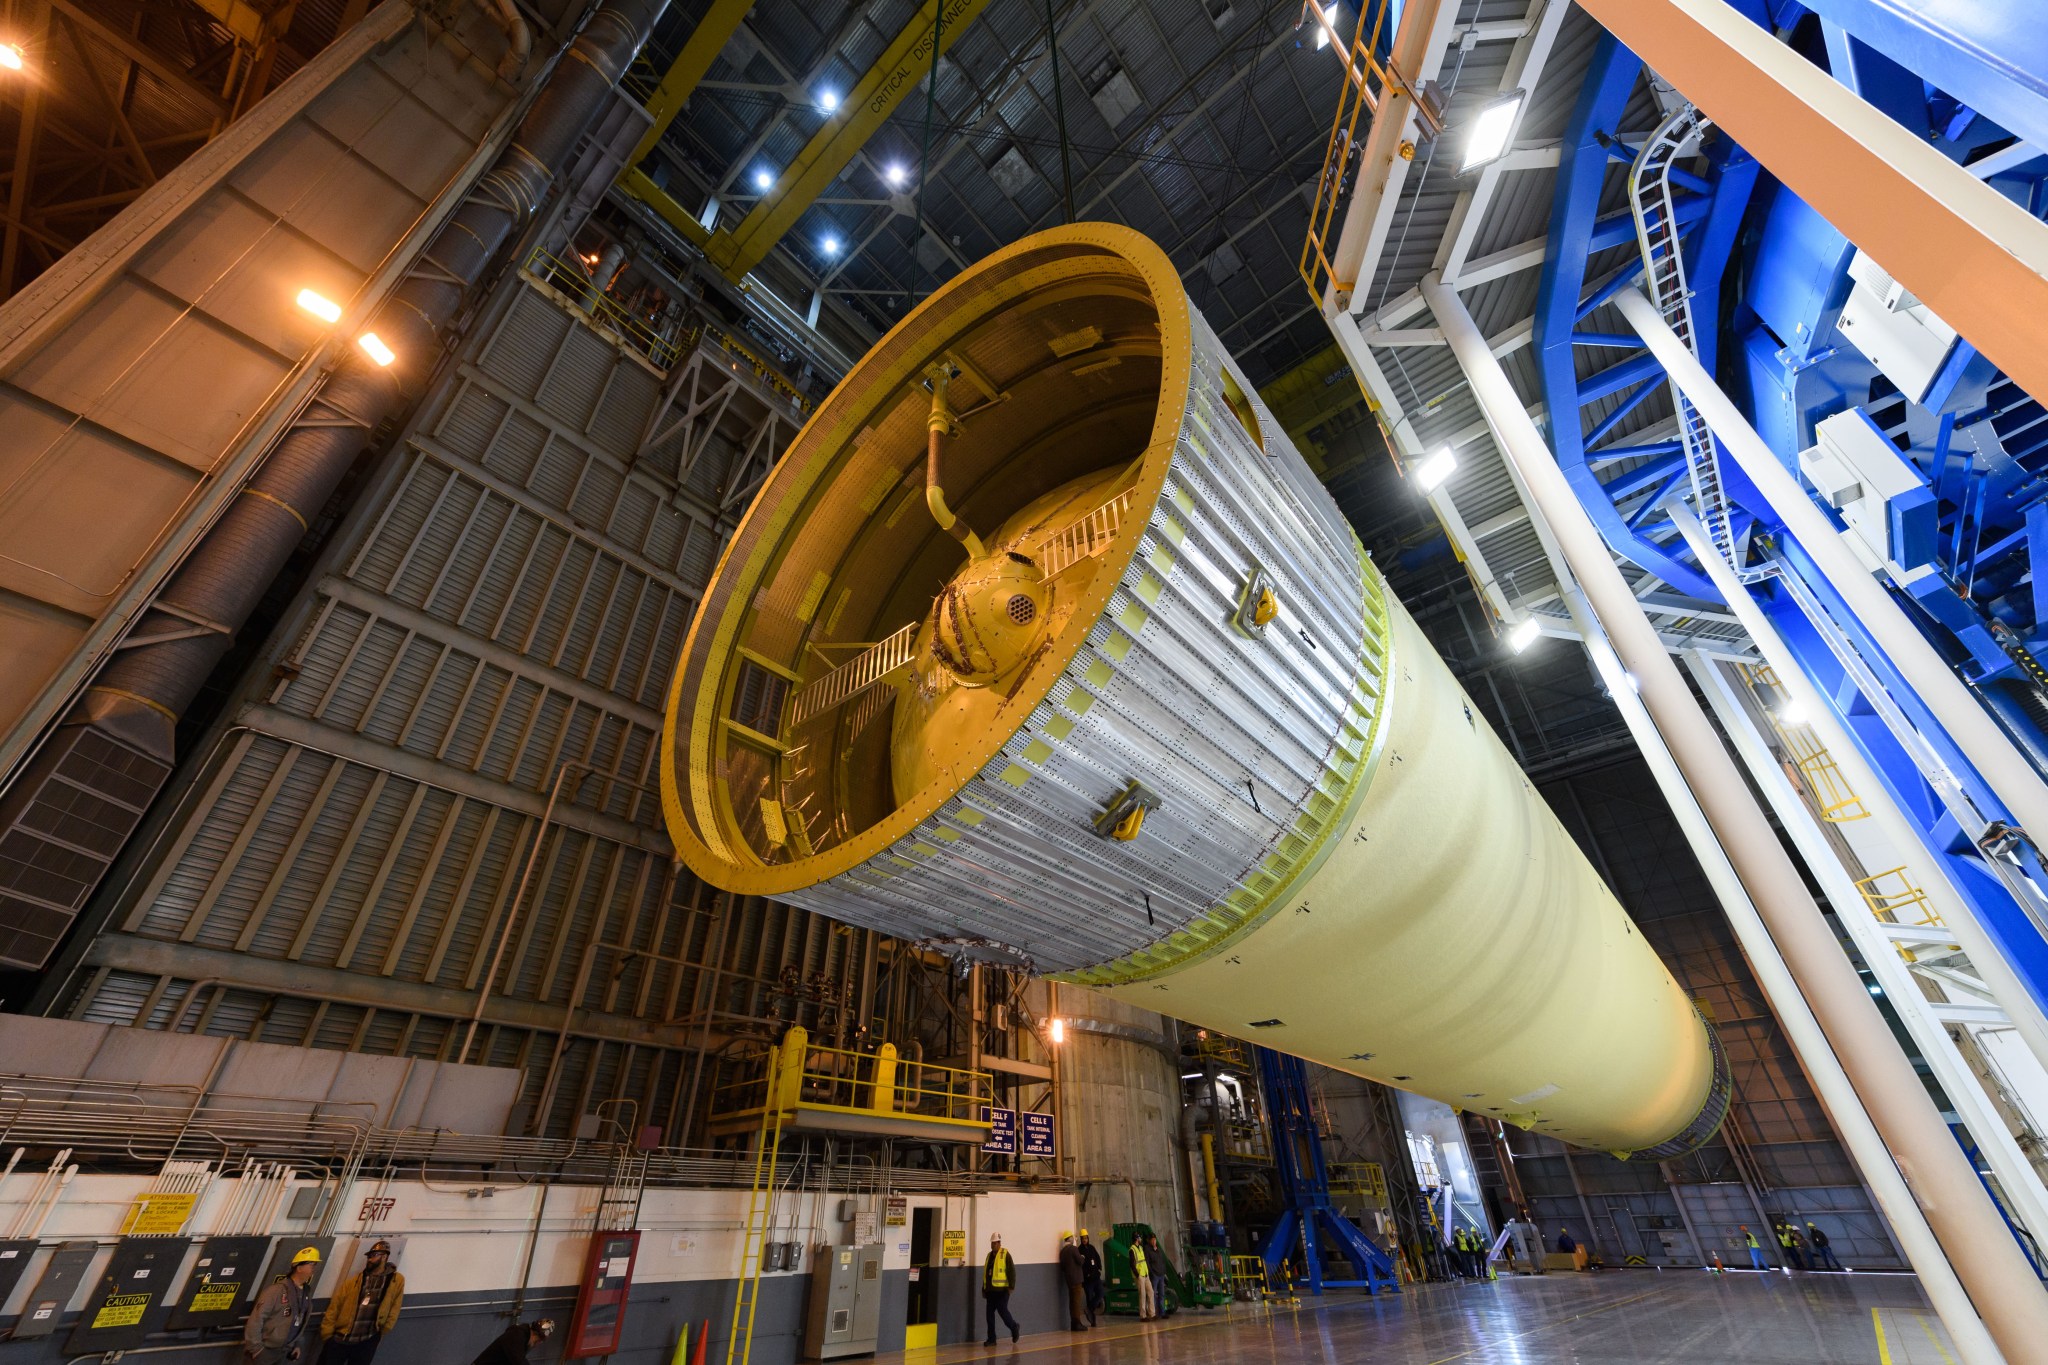 Space Launch System liquid hydrogen tank structural test article